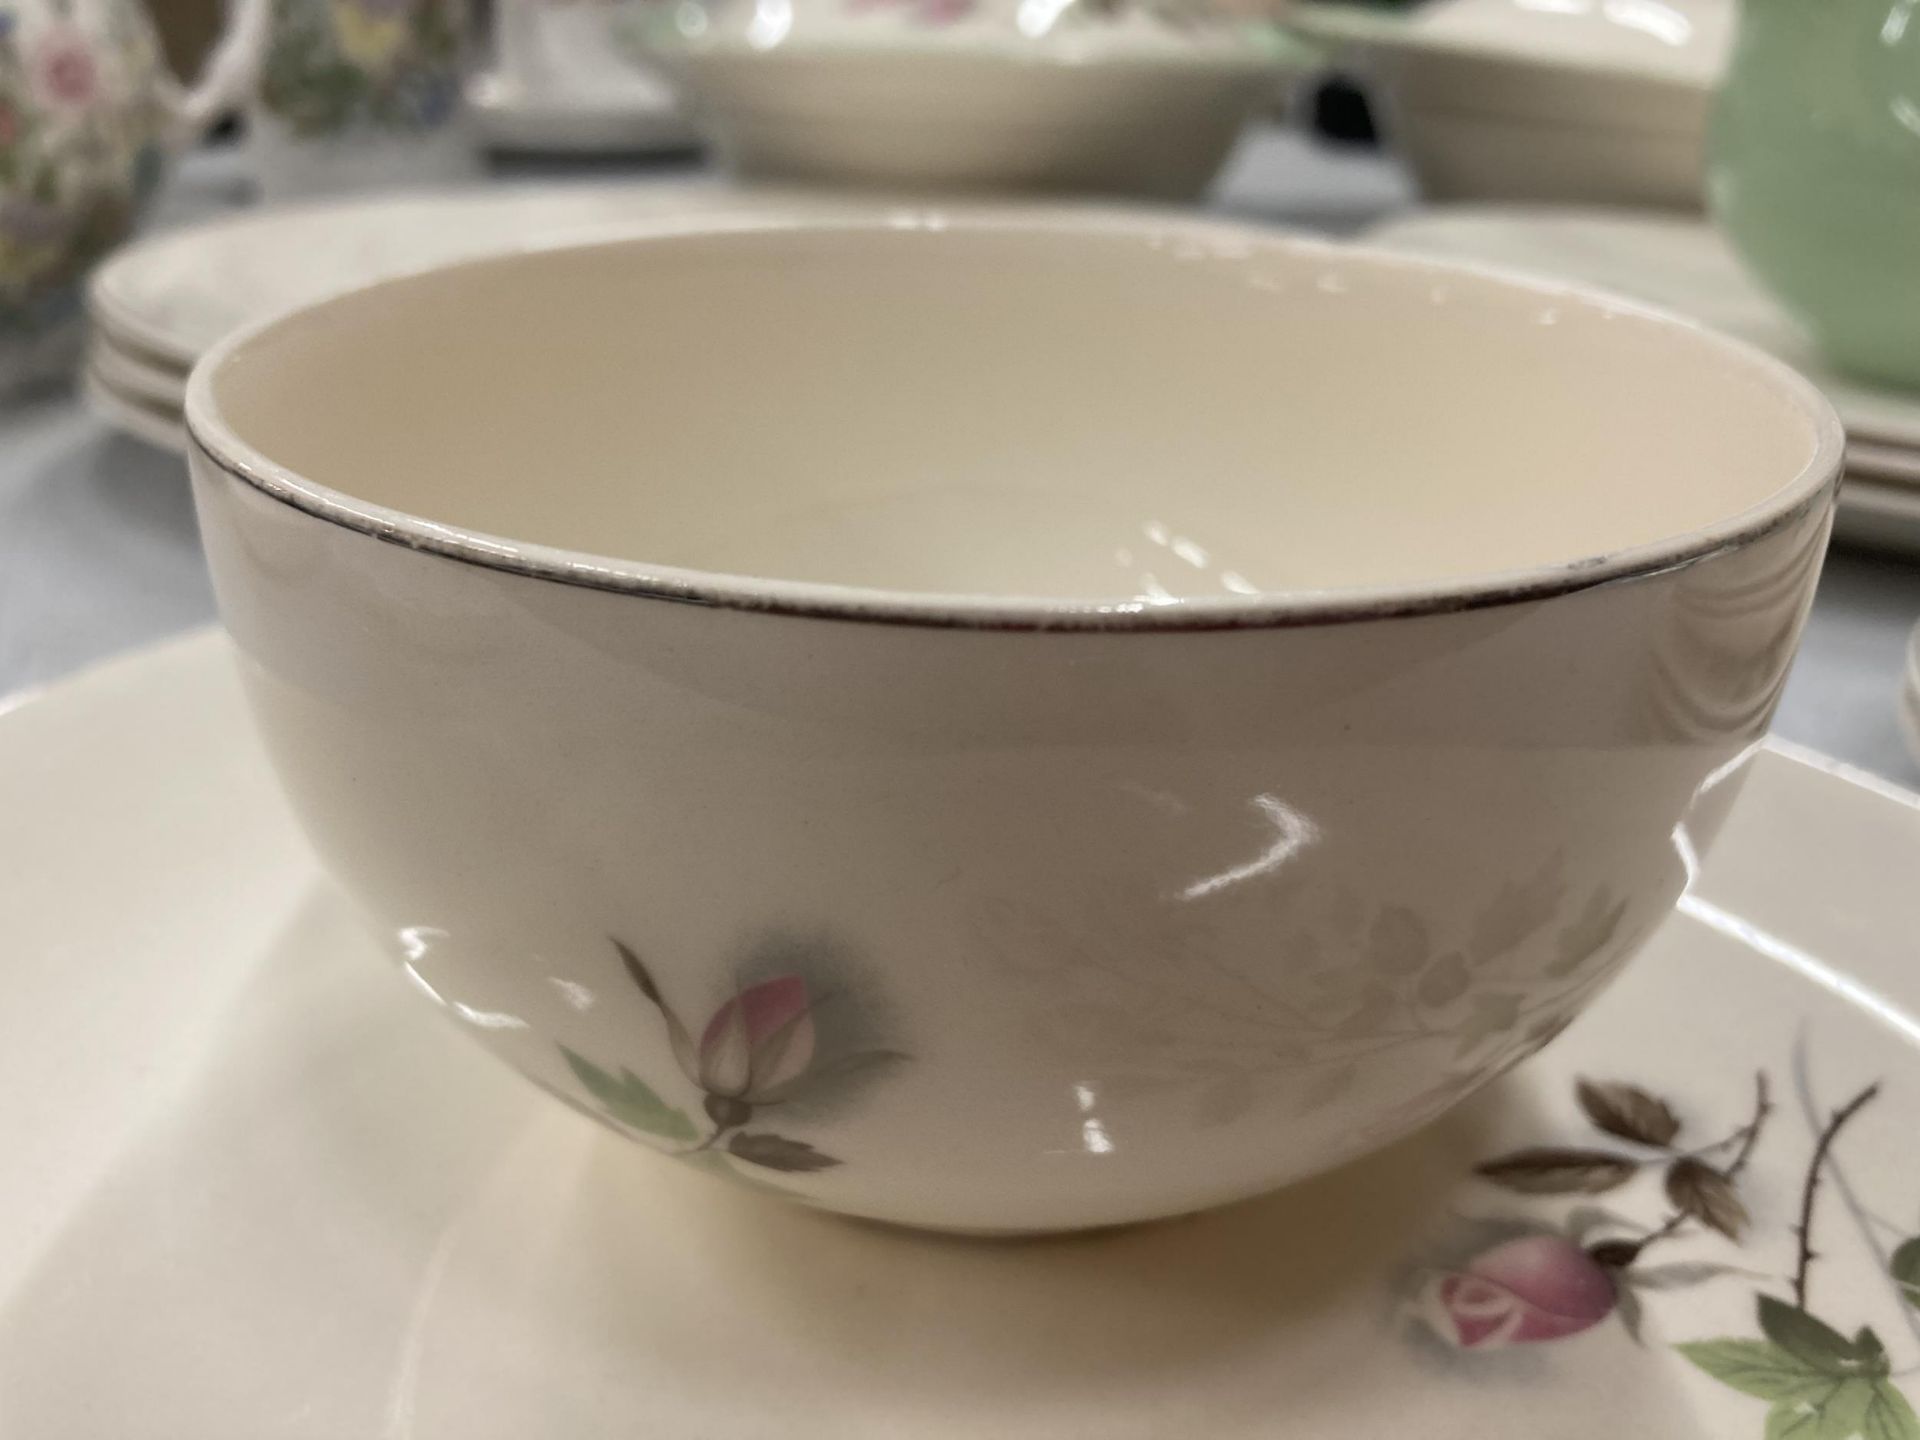 A QUANTITY OF VINTAGE JOHNSON BROS DINNER WARE TO INCLUDE SERVING TUREENS, PLATES, A SAUCE BOAT - Image 5 of 6